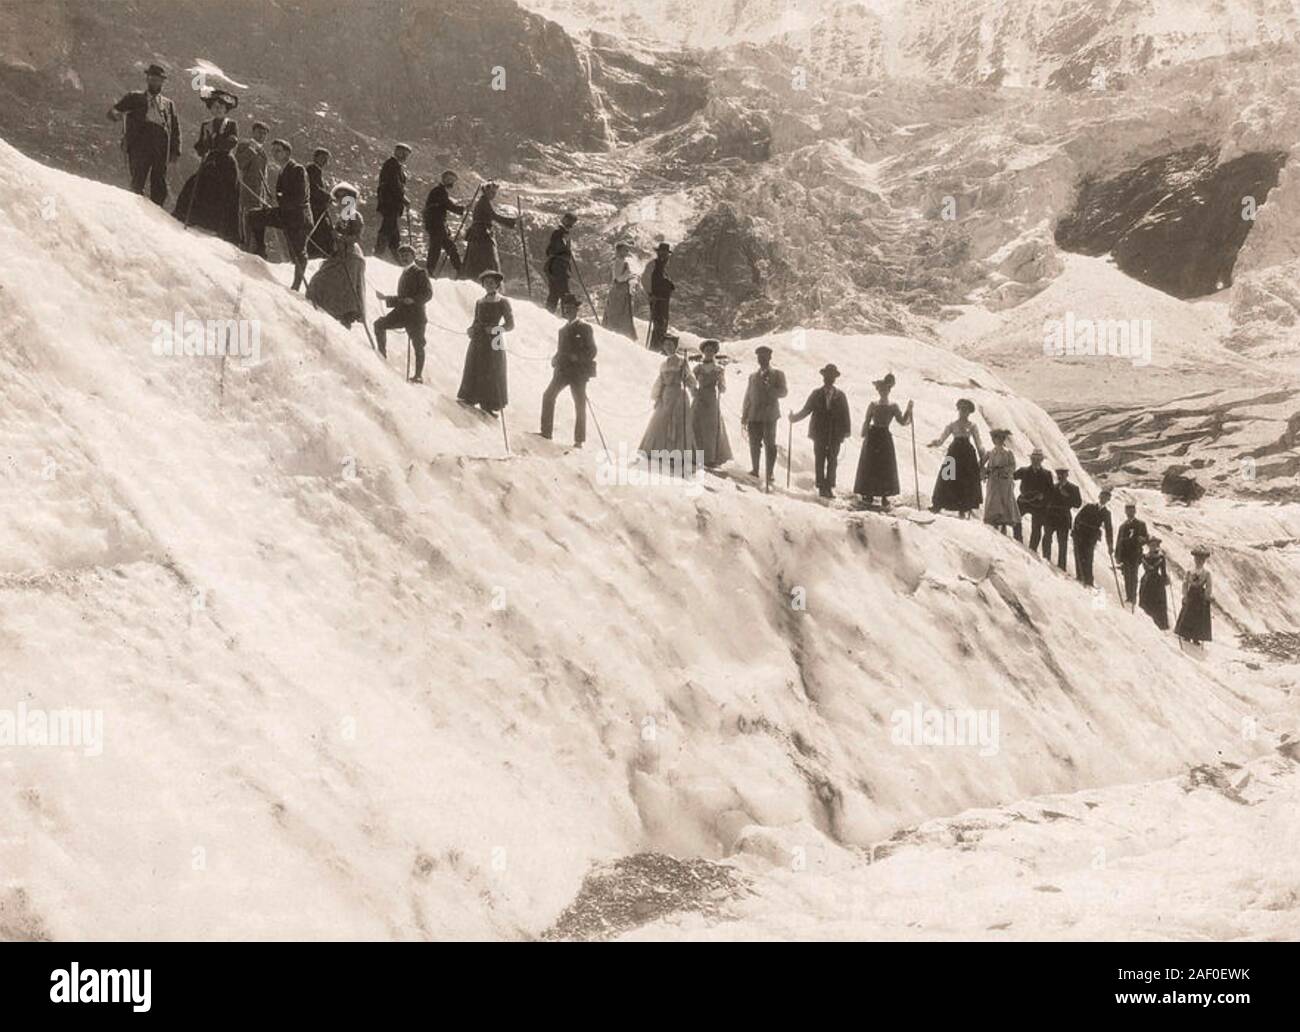 ALPINE CLIMBERS at Grinderwald, Germany about 1900 Stock Photo